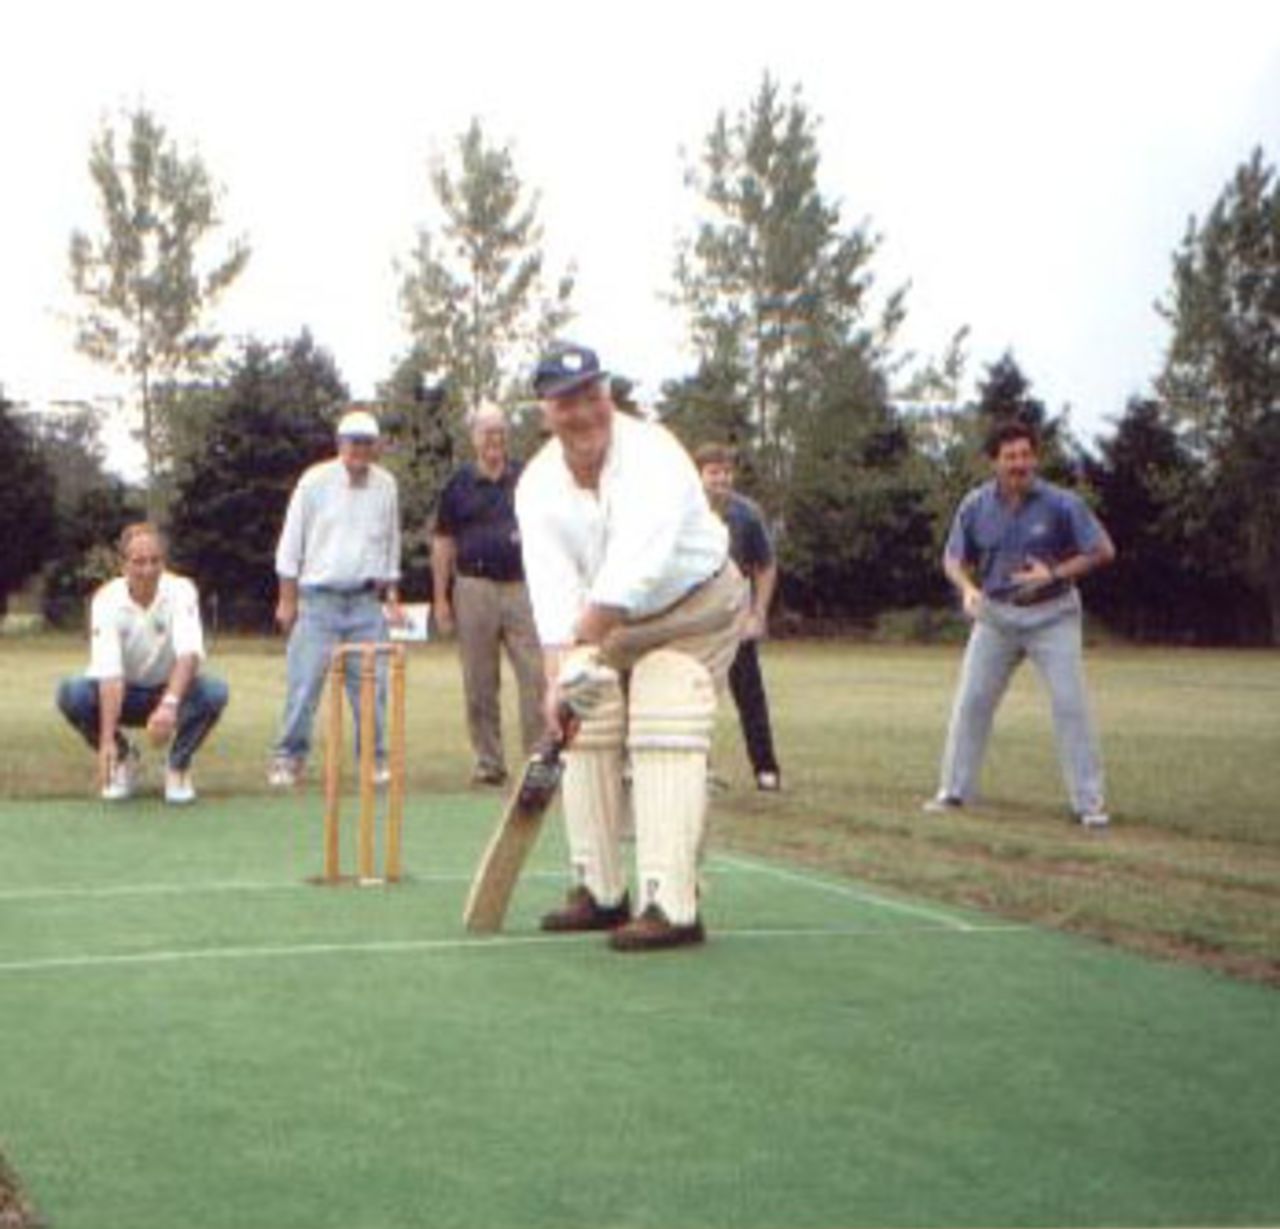 President of Lomas Athletic Club, Armando Fioriolli, prepares to receive the first ball from Americas Development Manager, Robert Weekes, at the inauguration of the new ground and artificial wicket at Longchamps. ACA Chairman, Ricardo Lord, is keeping wicket , 20th October 2001